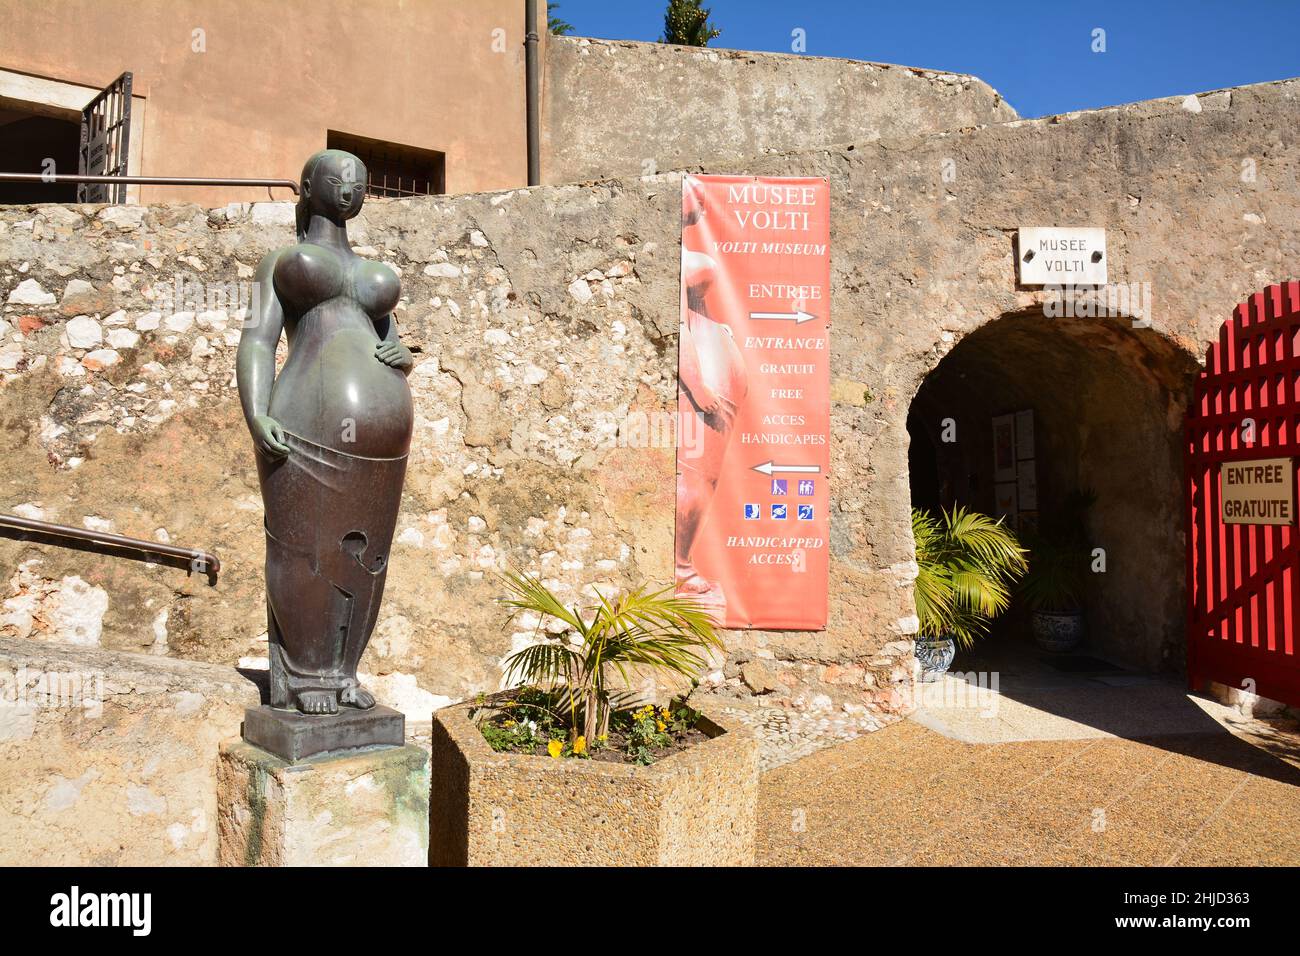 France, french riviera, Villefranche sur mer, he Volti museum in the citadel shelters bronze women statues in sensual curves ot the sculptor A. Volti. Stock Photo